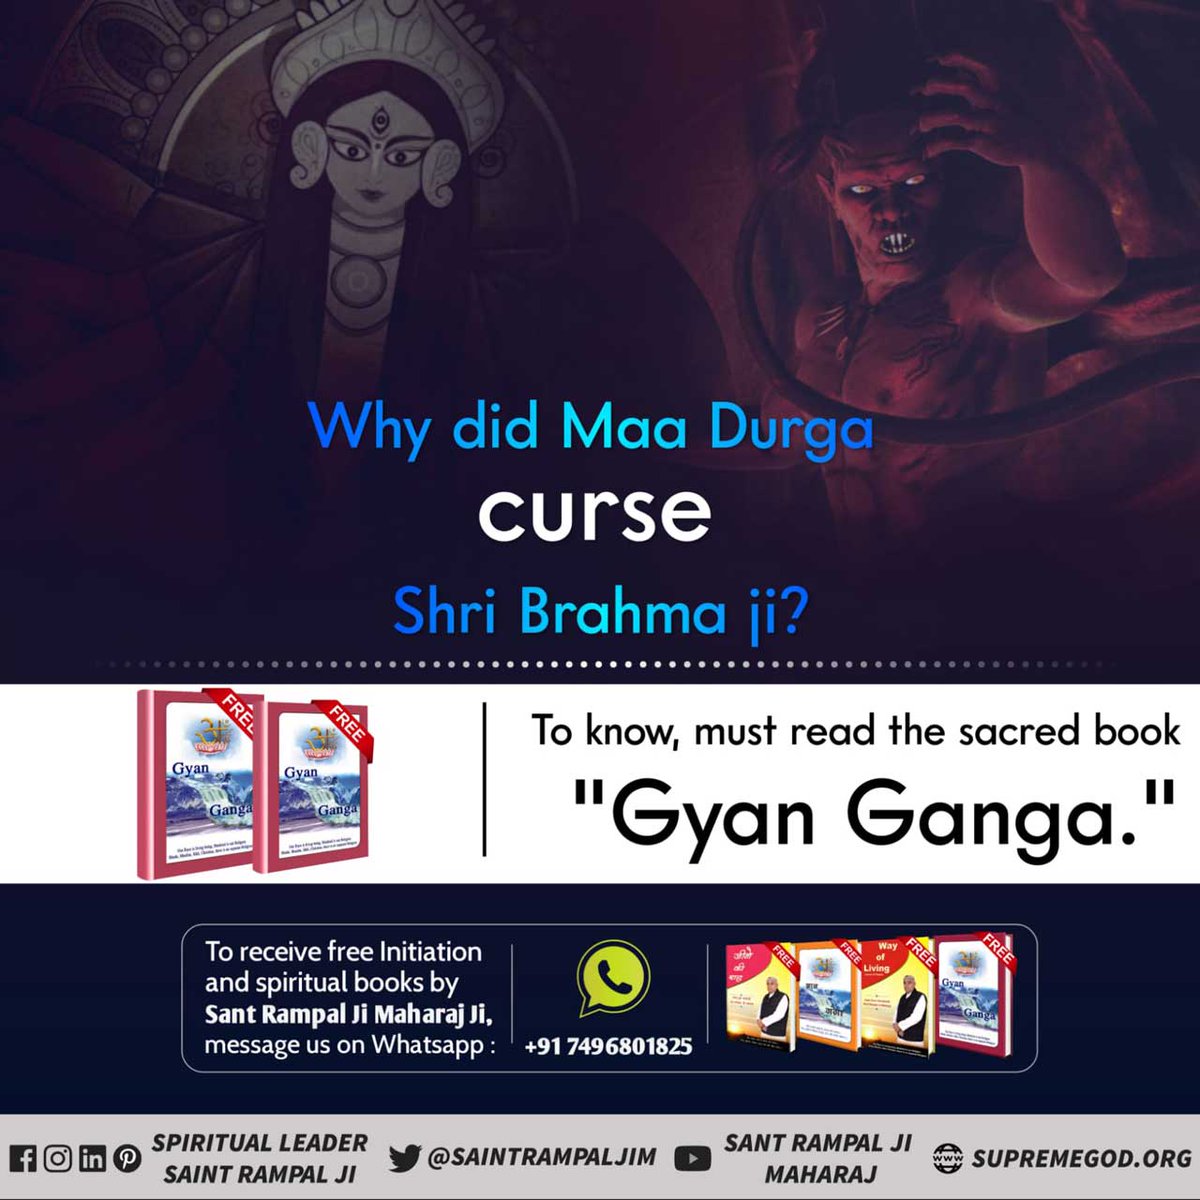 #GodMorningThursday
#Spiritual
#ThursdayThoughts
#TuesdayFeeling
#TuesdayTips 
Why is Brahma not worshipped?

Reading the 'Gyan Ganga'' book📖 will solve hundreds of such questions.